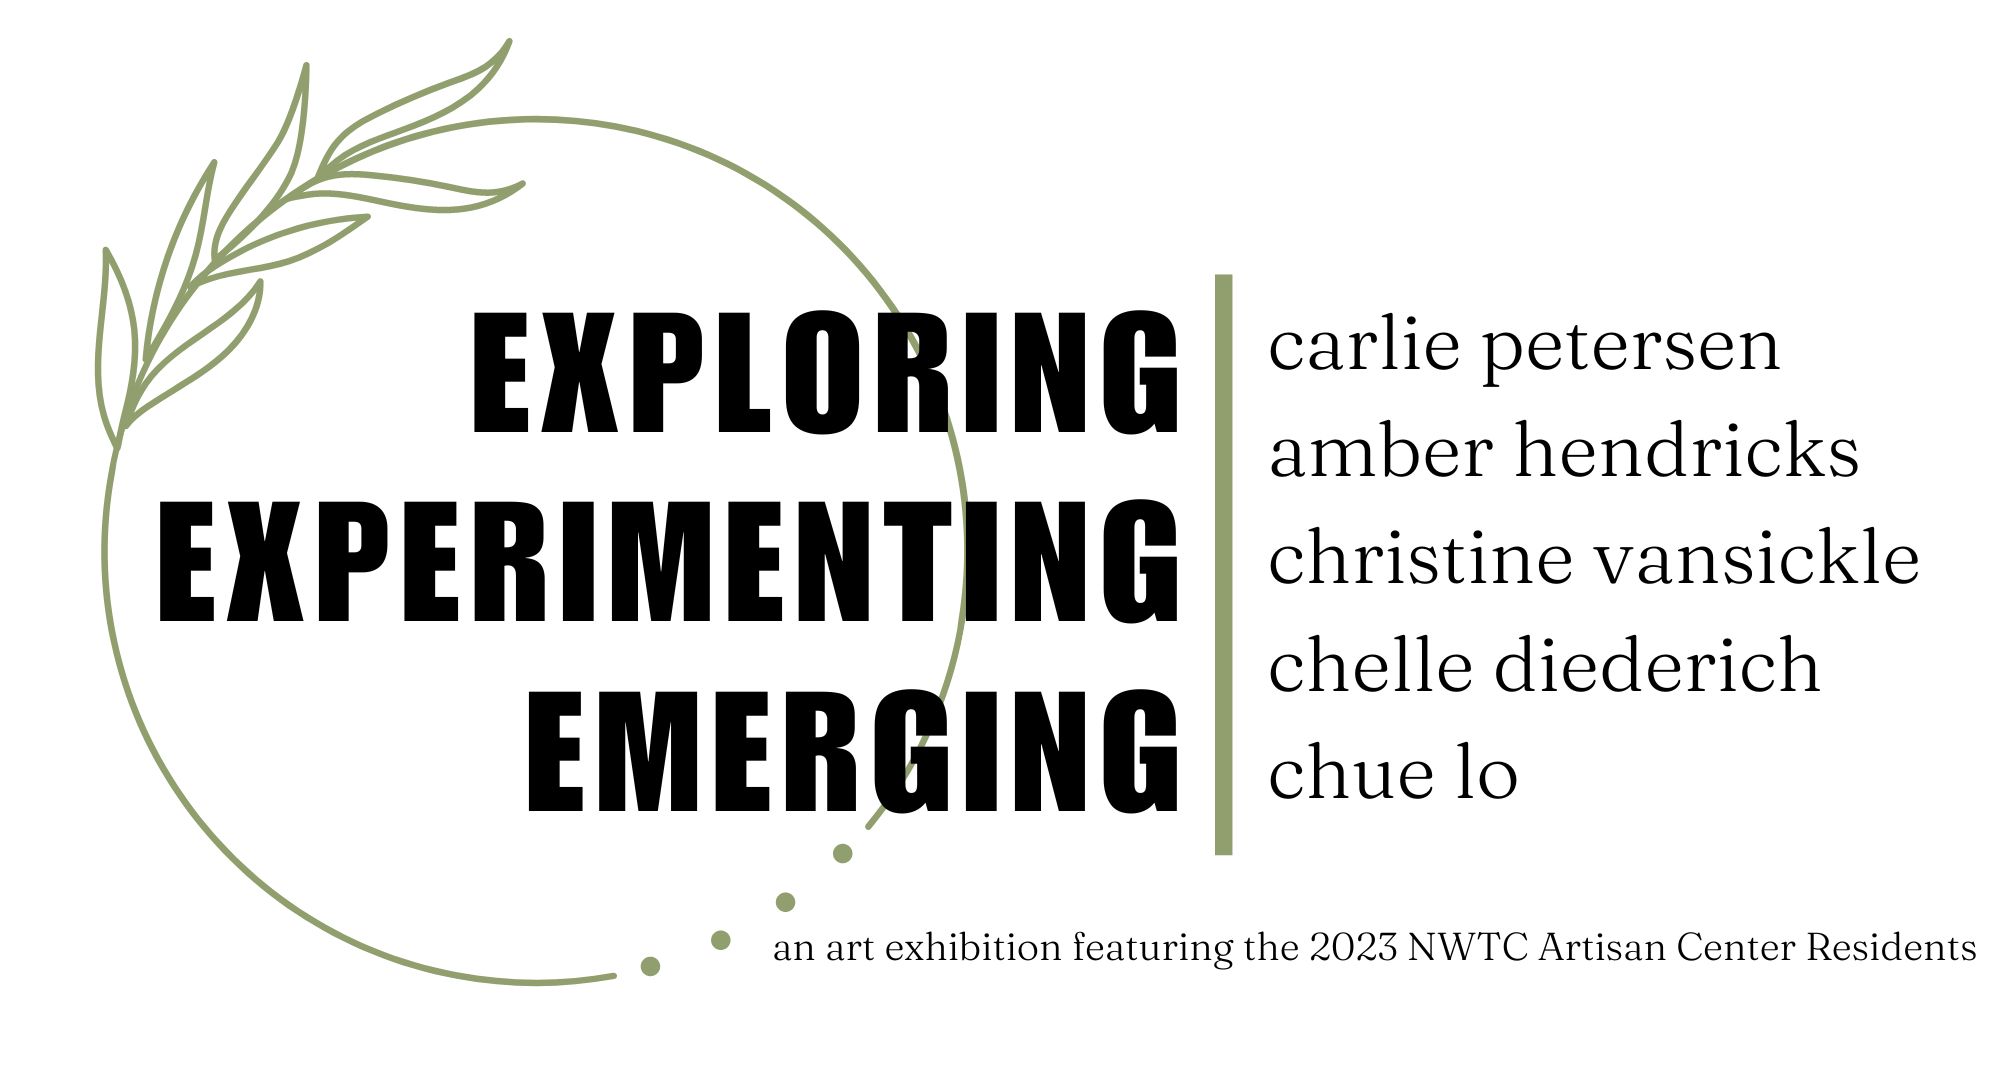 Exploring, Experimenting, Emerging. An art exhibition featuring the 2023 NWTC Artisan Center Residents